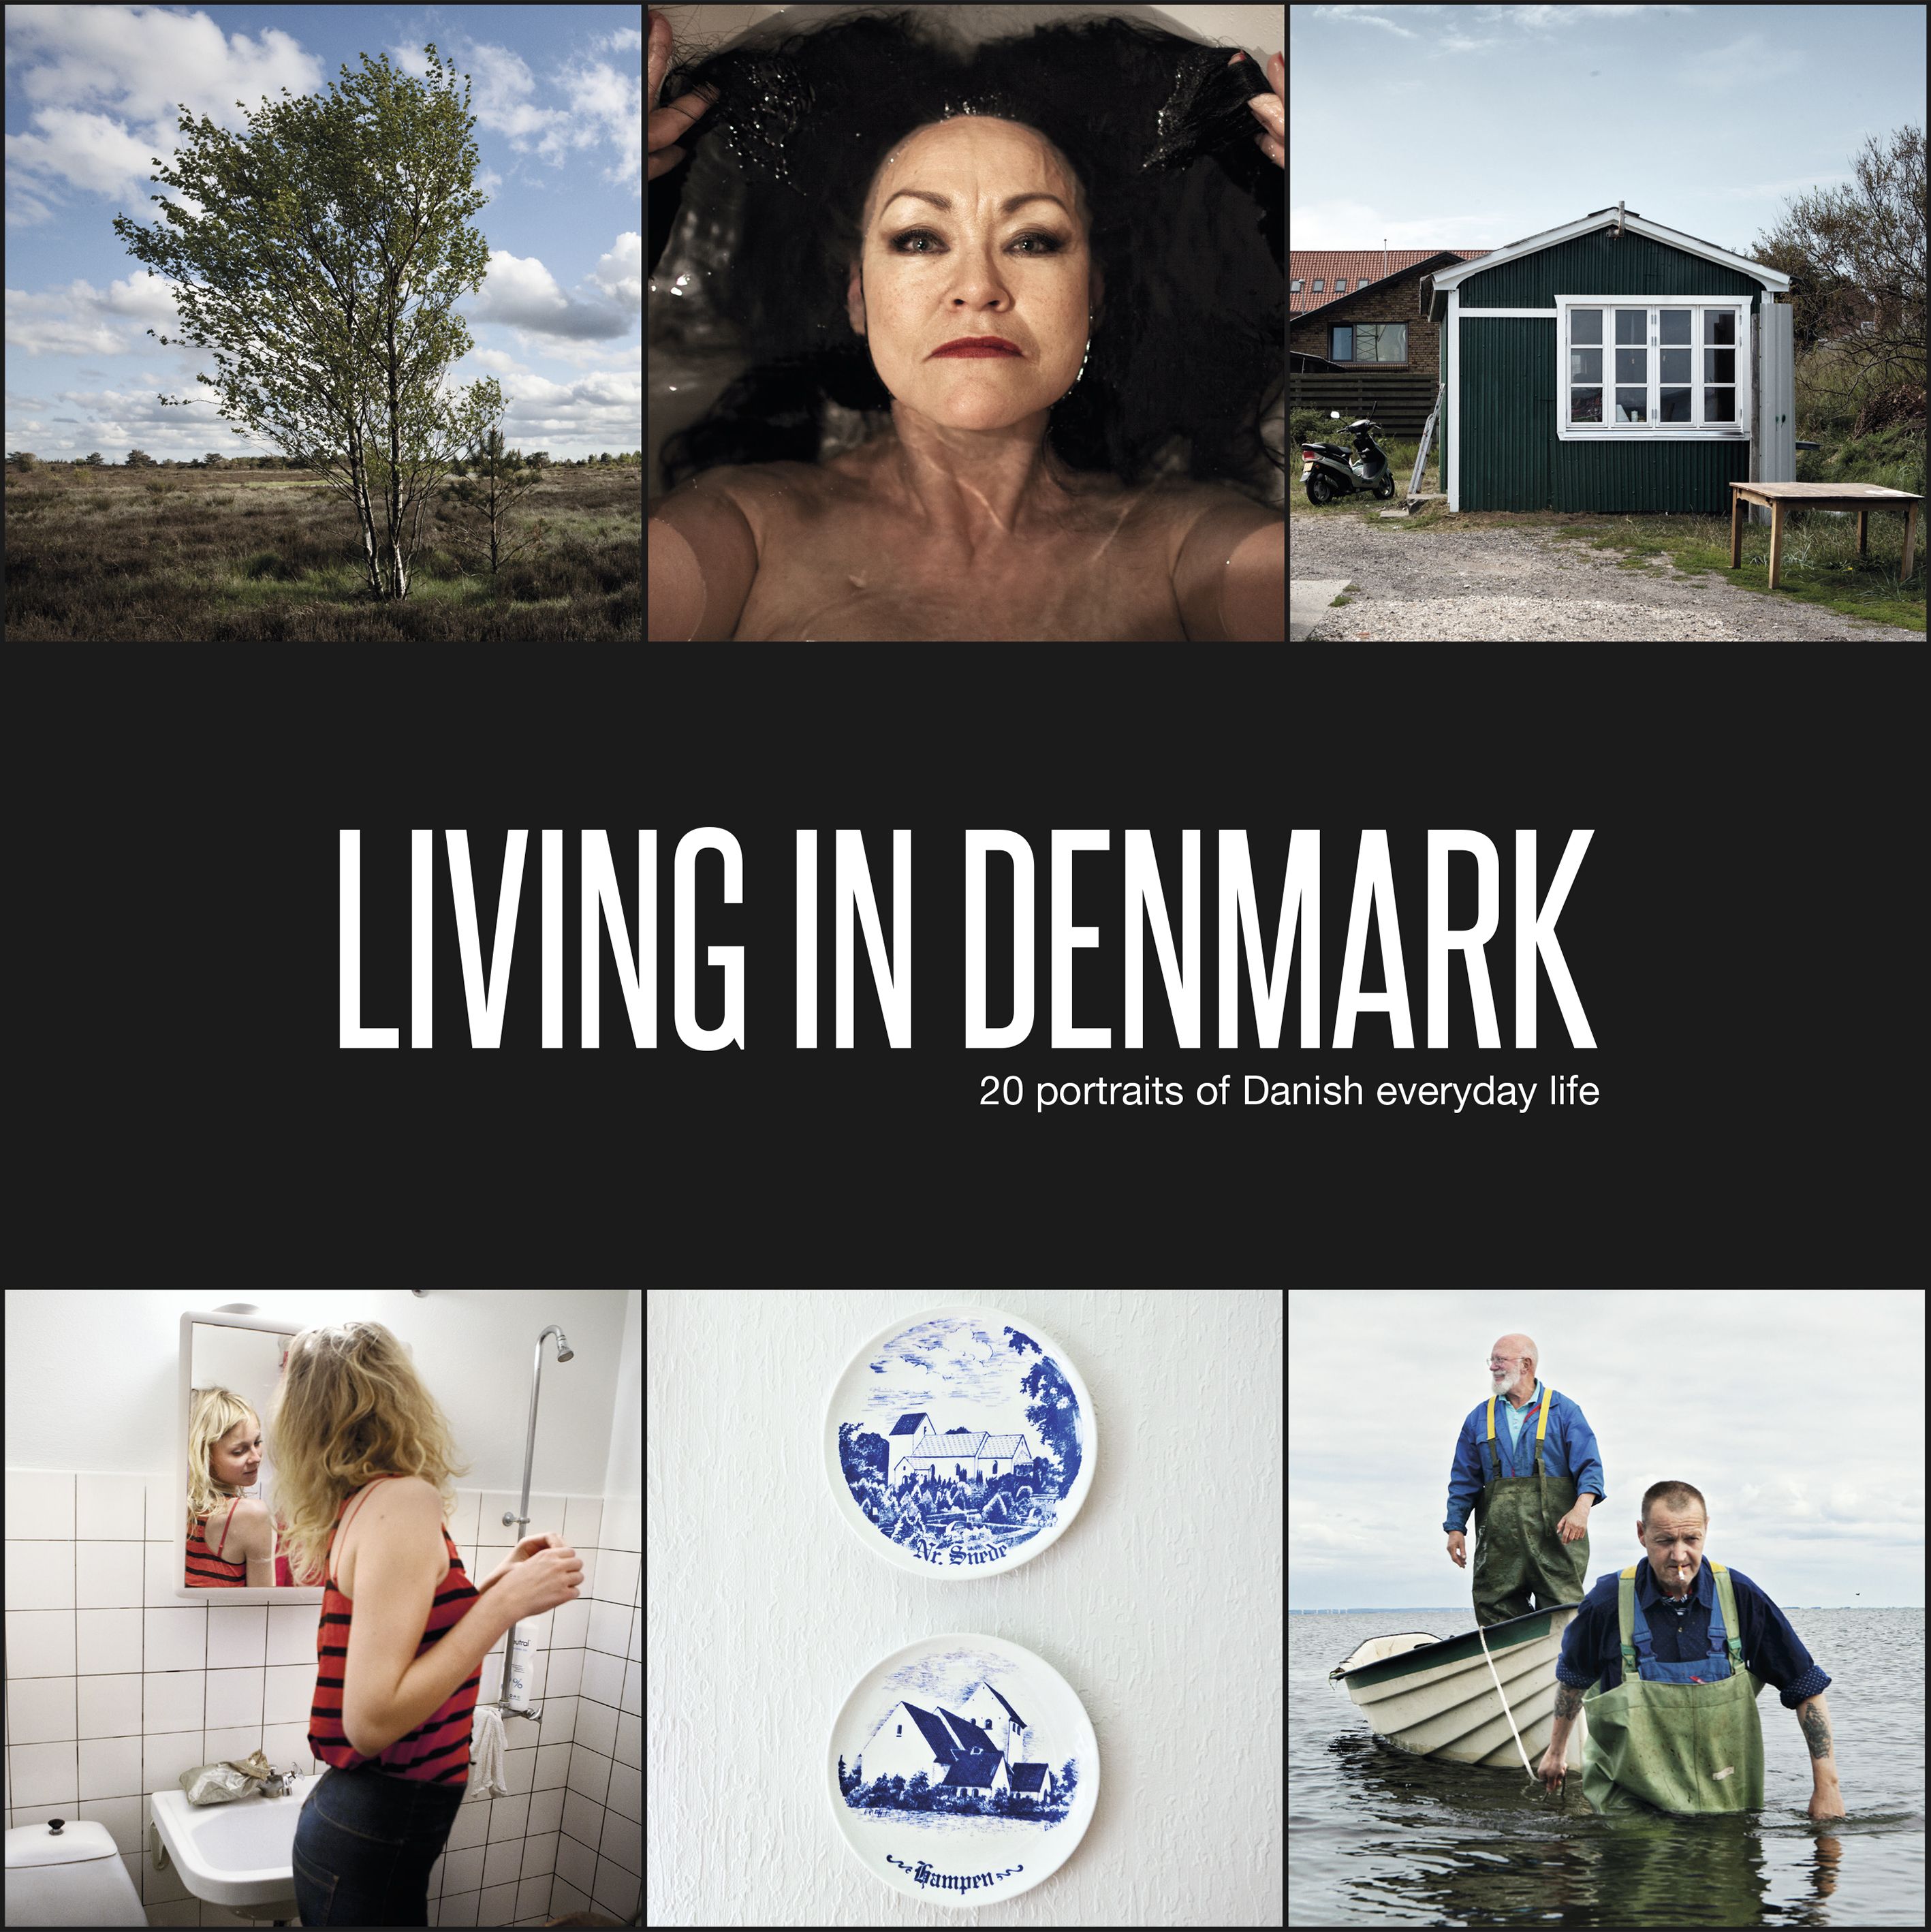 New book about Denmark invites readers into the lives of everyday Danes